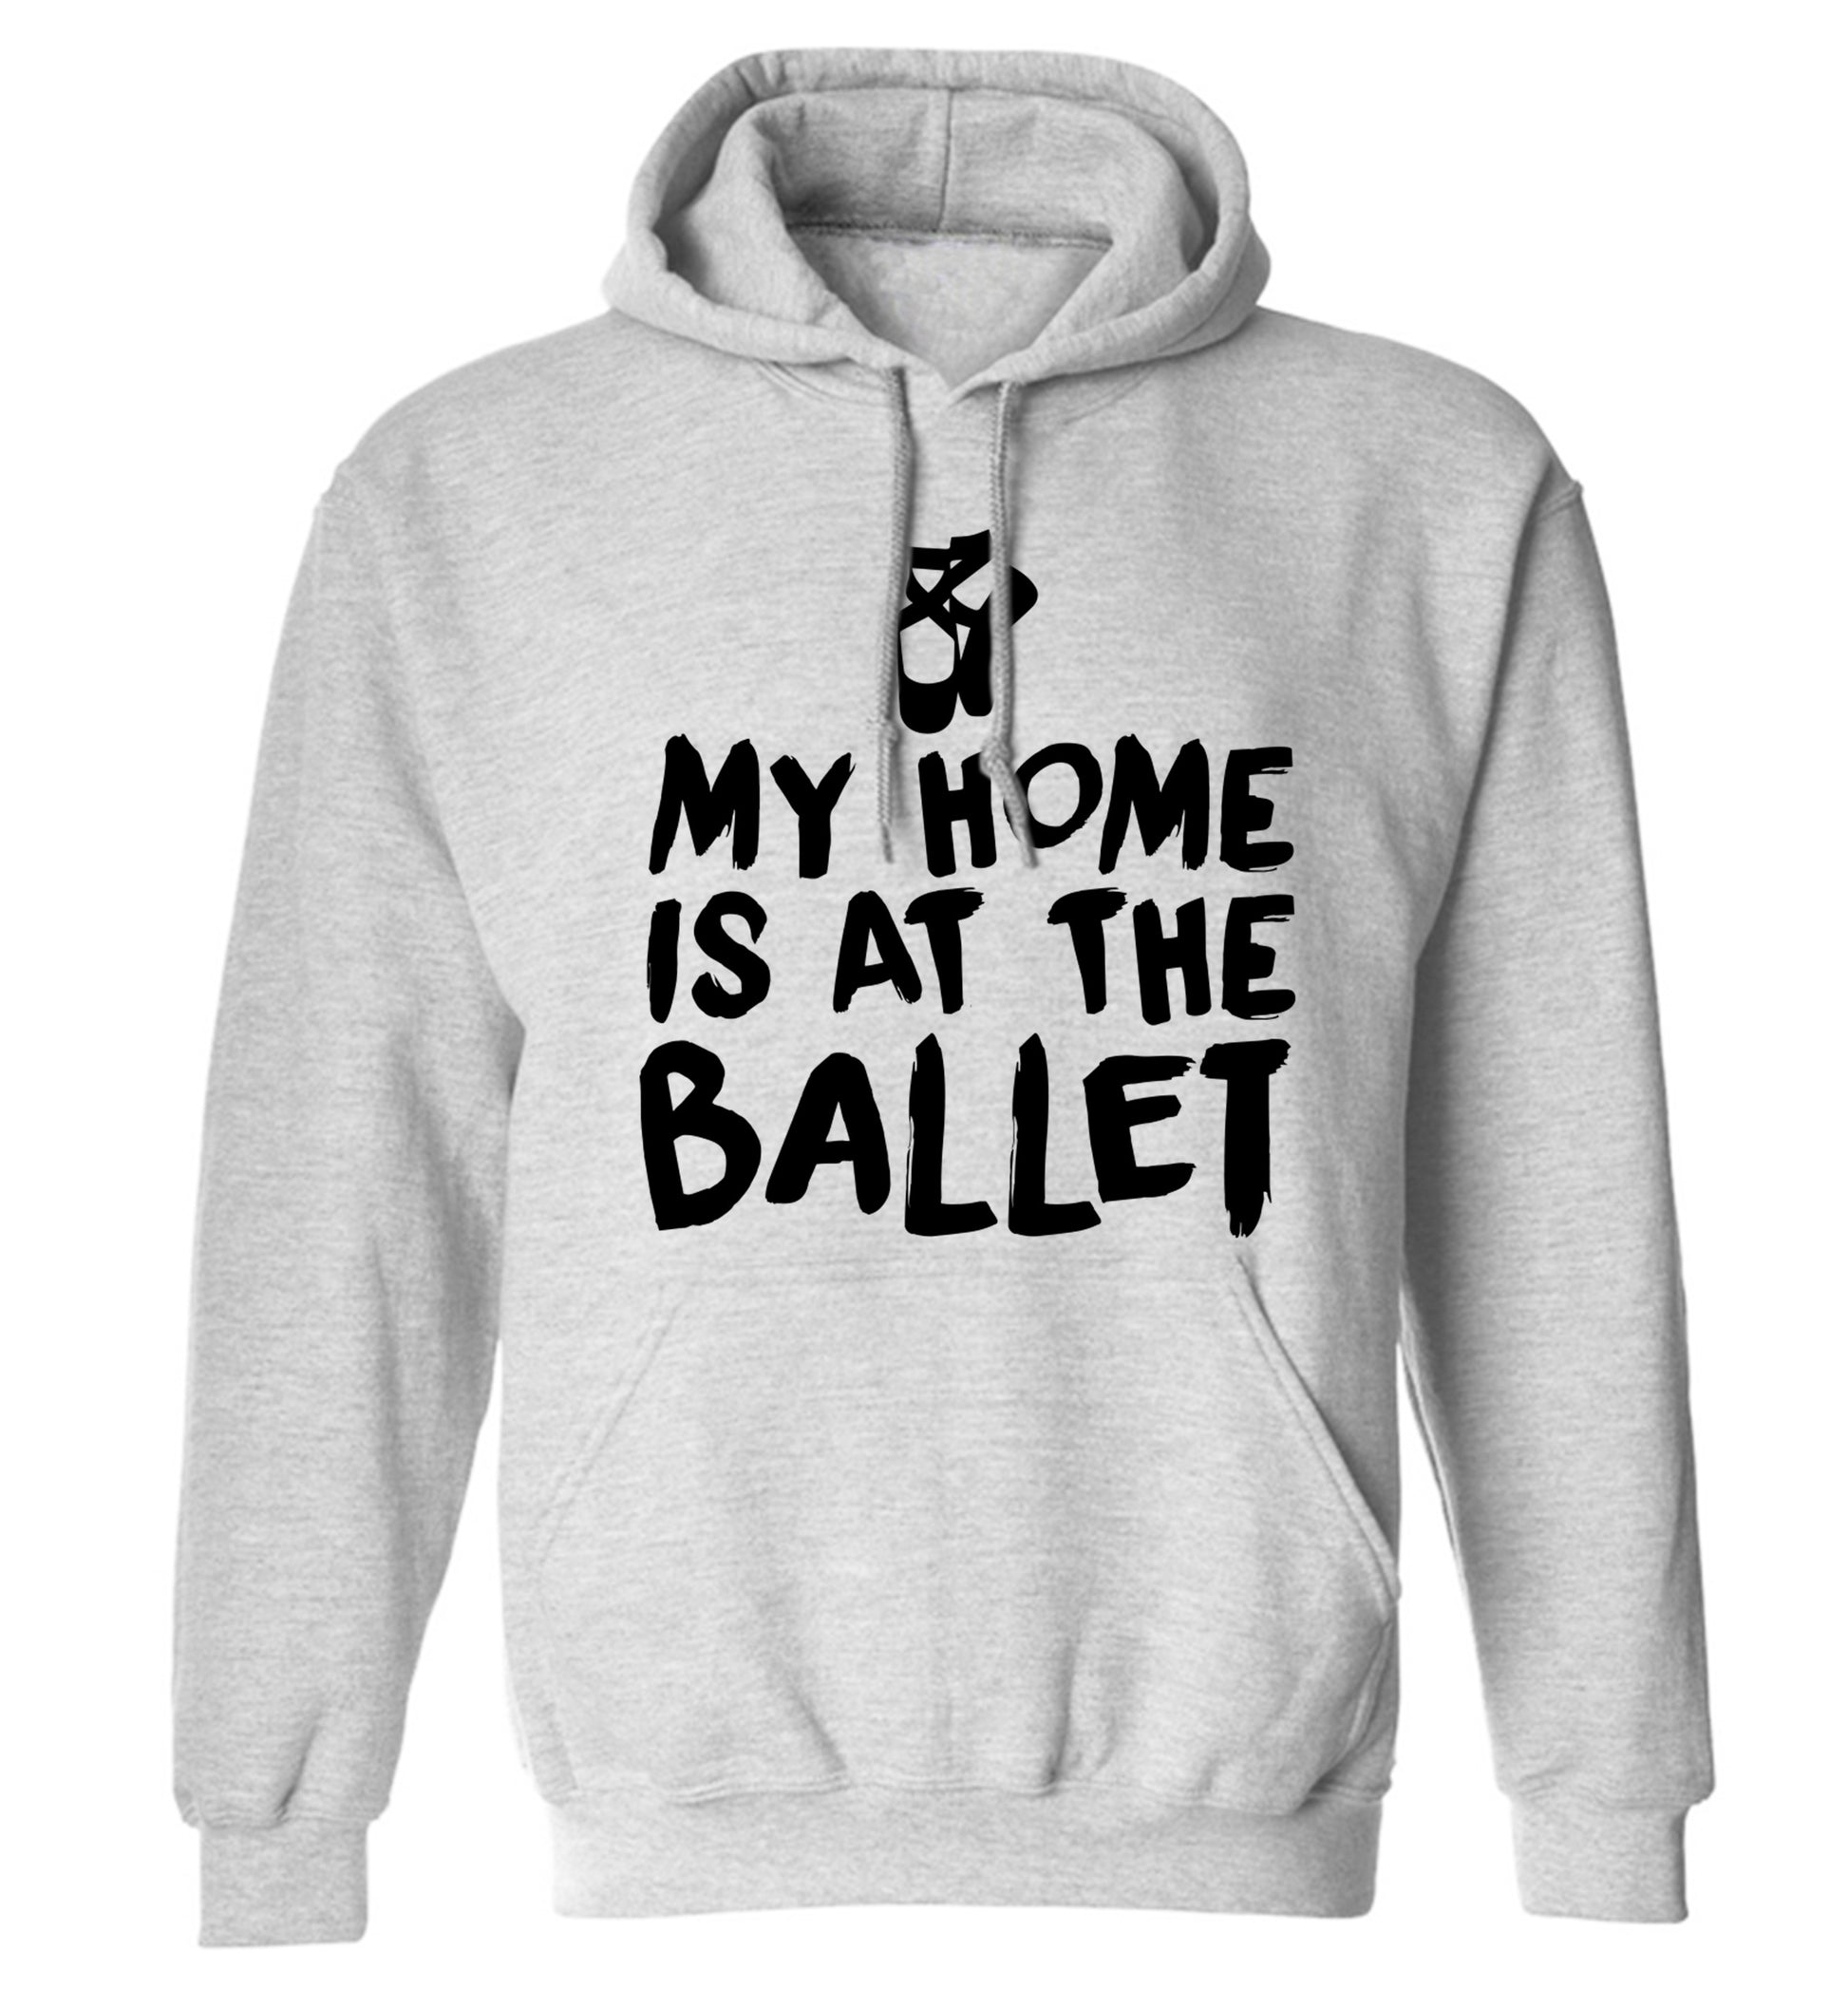 My home is at the dance studio adults unisex grey hoodie 2XL